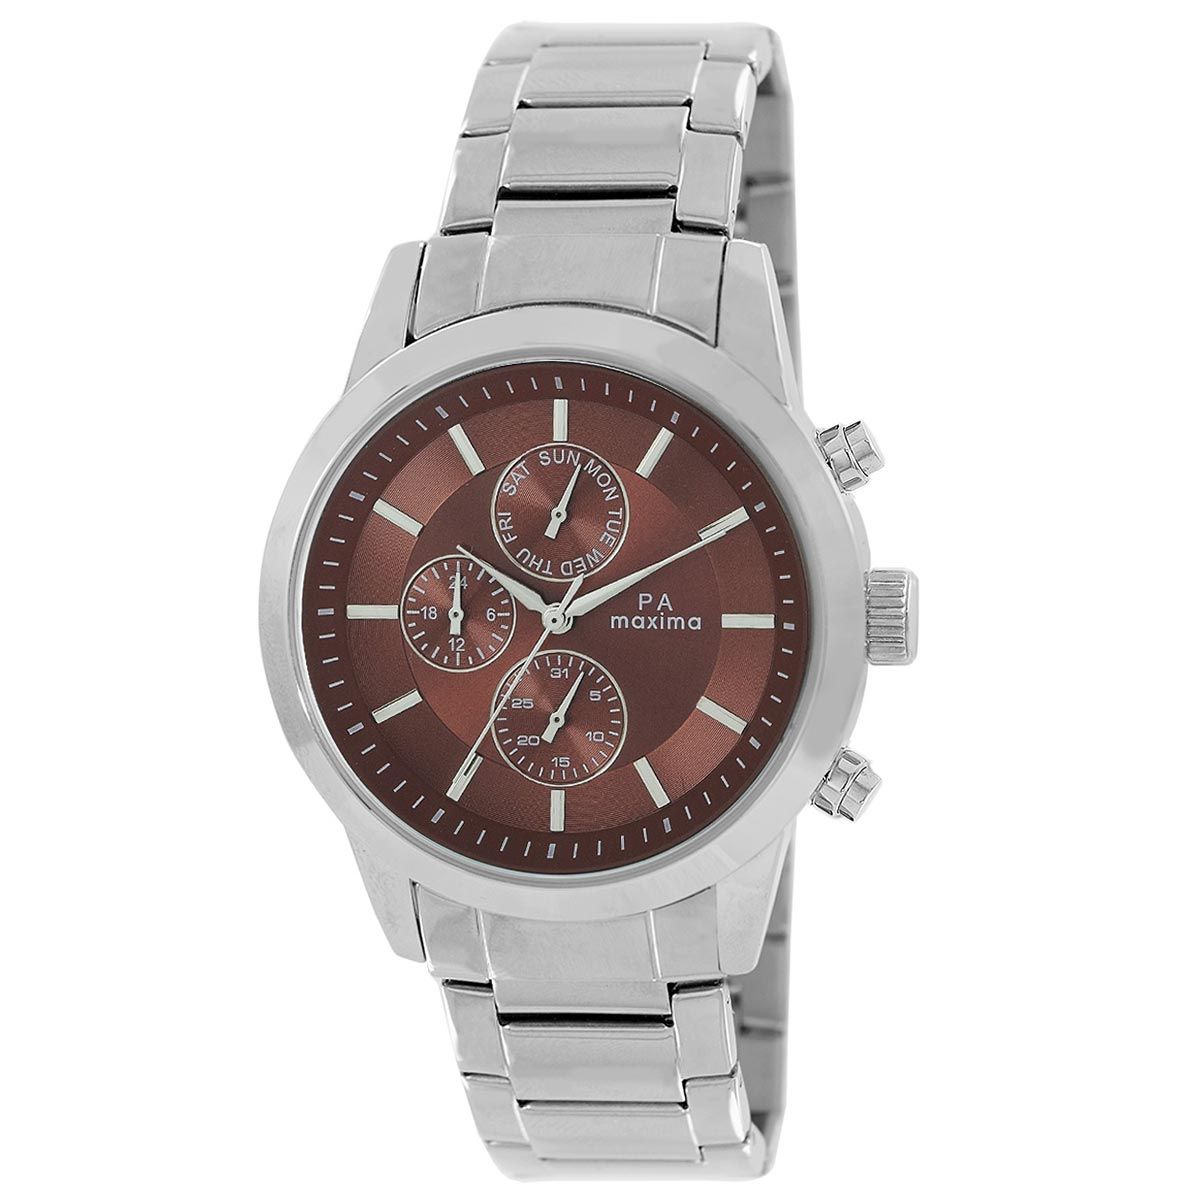 Buy PA Maxima Attivo Analog Watch for Men in Silver Dial Color Online